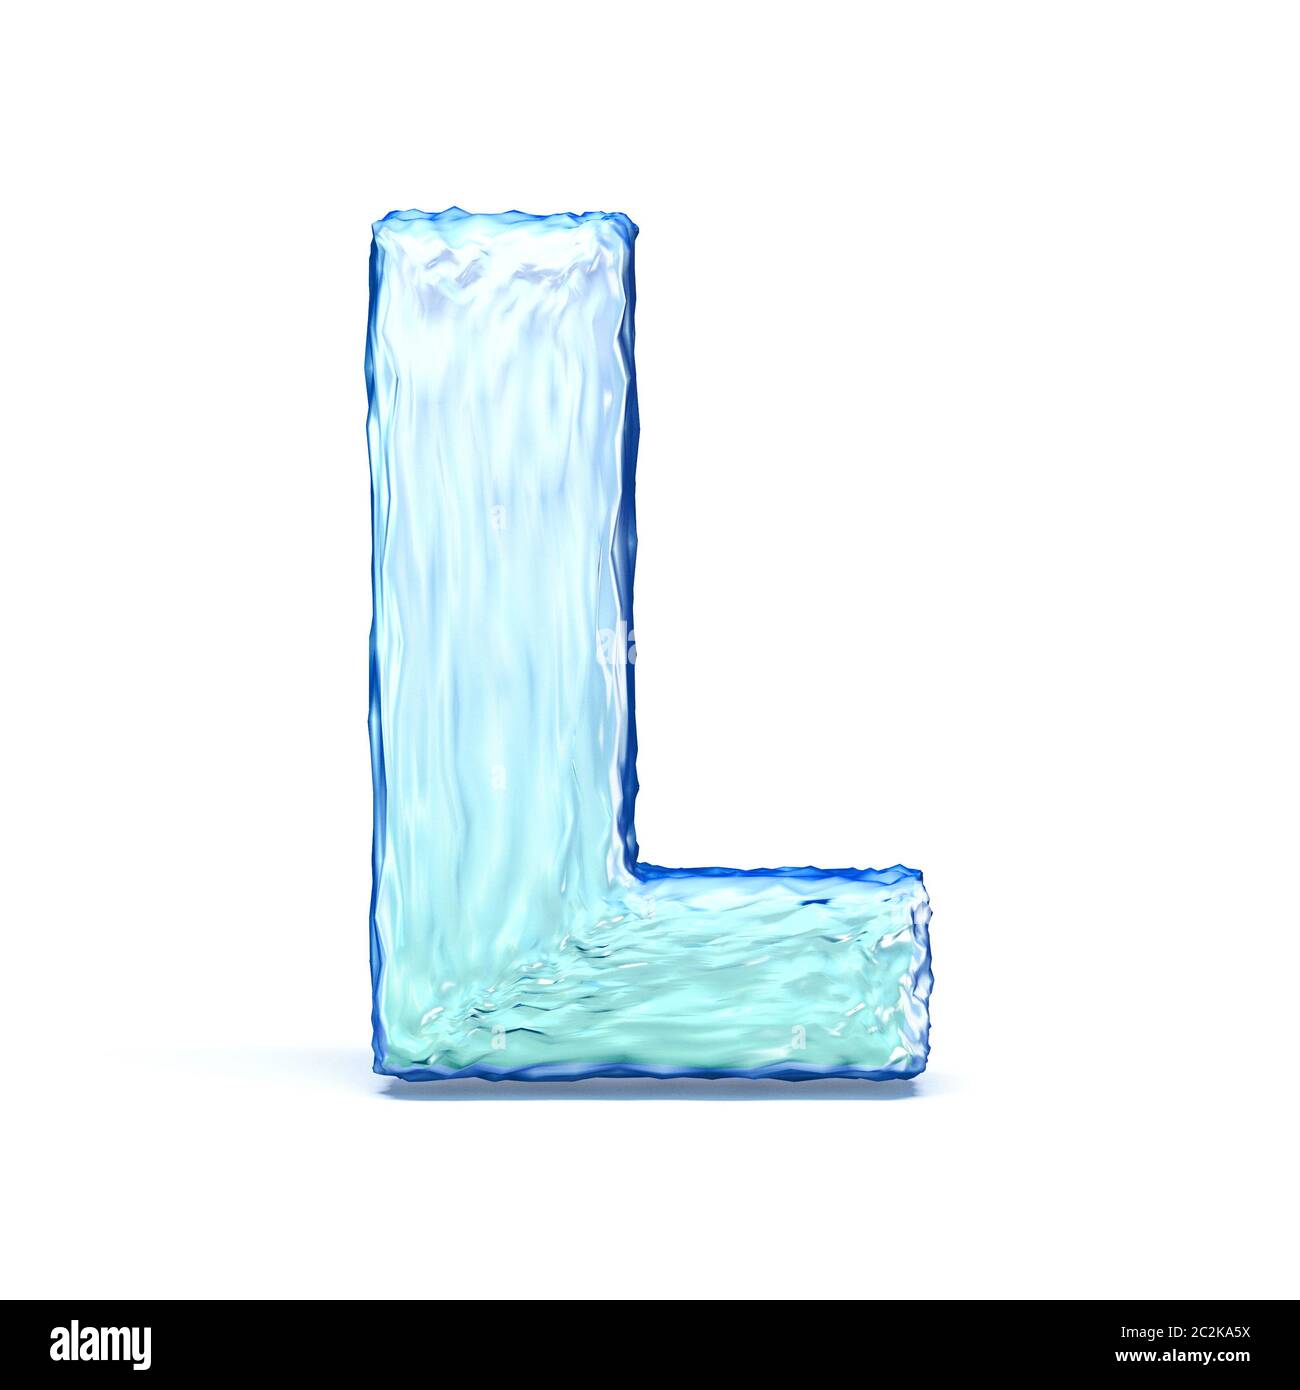 Ice crystal font letter L 3D render illustration isolated on white background Stock Photo